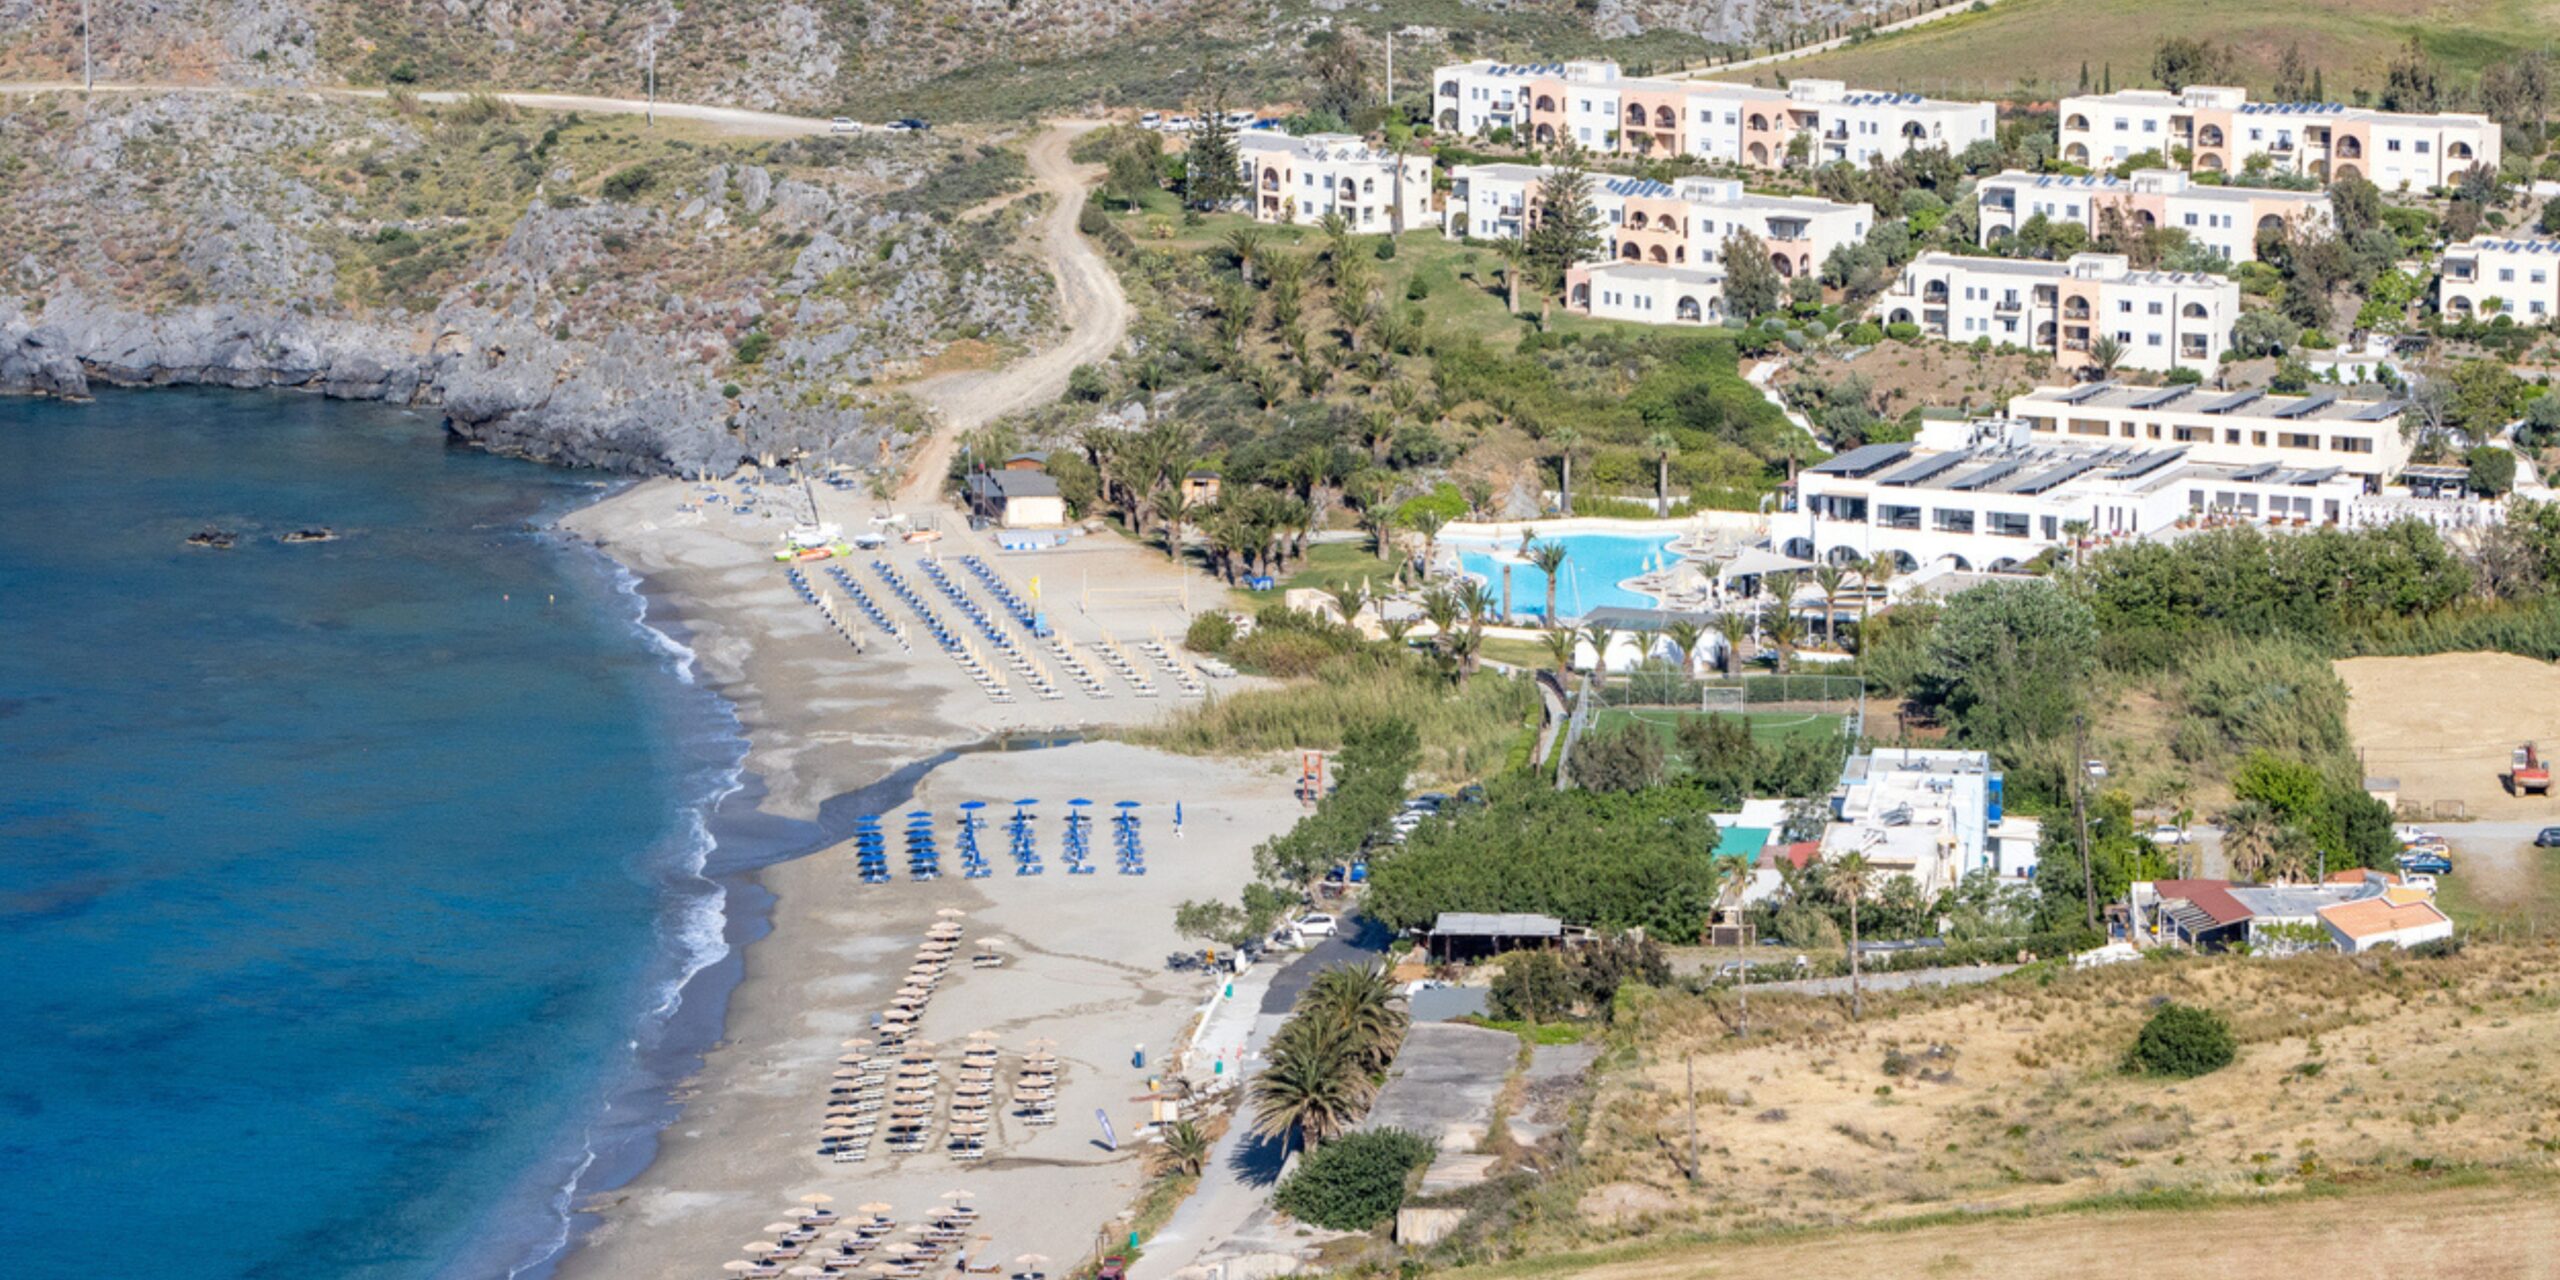 Aerial view of a coastal resort with a swimming pool, beach chairs lined up on the sand, and Mediterranean-style buildings nestled in a hilly landscape.